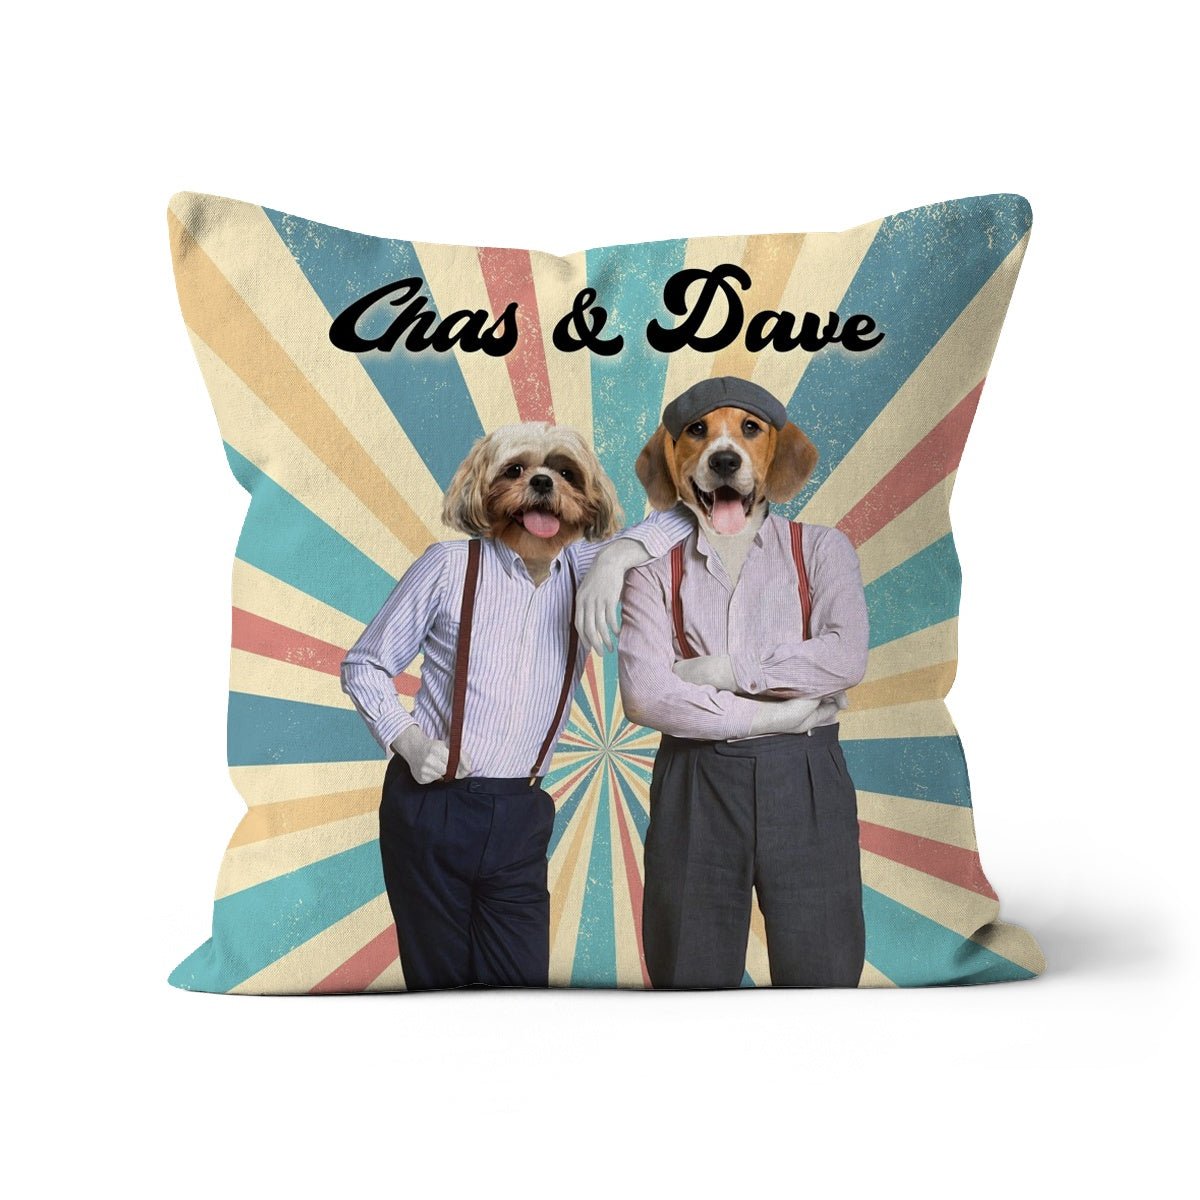 Chas & Dave: Custom Pet Cushion - Paw & Glory - #pet portraits# - #dog portraits# - #pet portraits uk#paw and glory, pet portraits cushion,personalised dog pillows, dog photo on pillow, pillow with dogs face, dog pillow cases, pillow custom, pet custom pillow